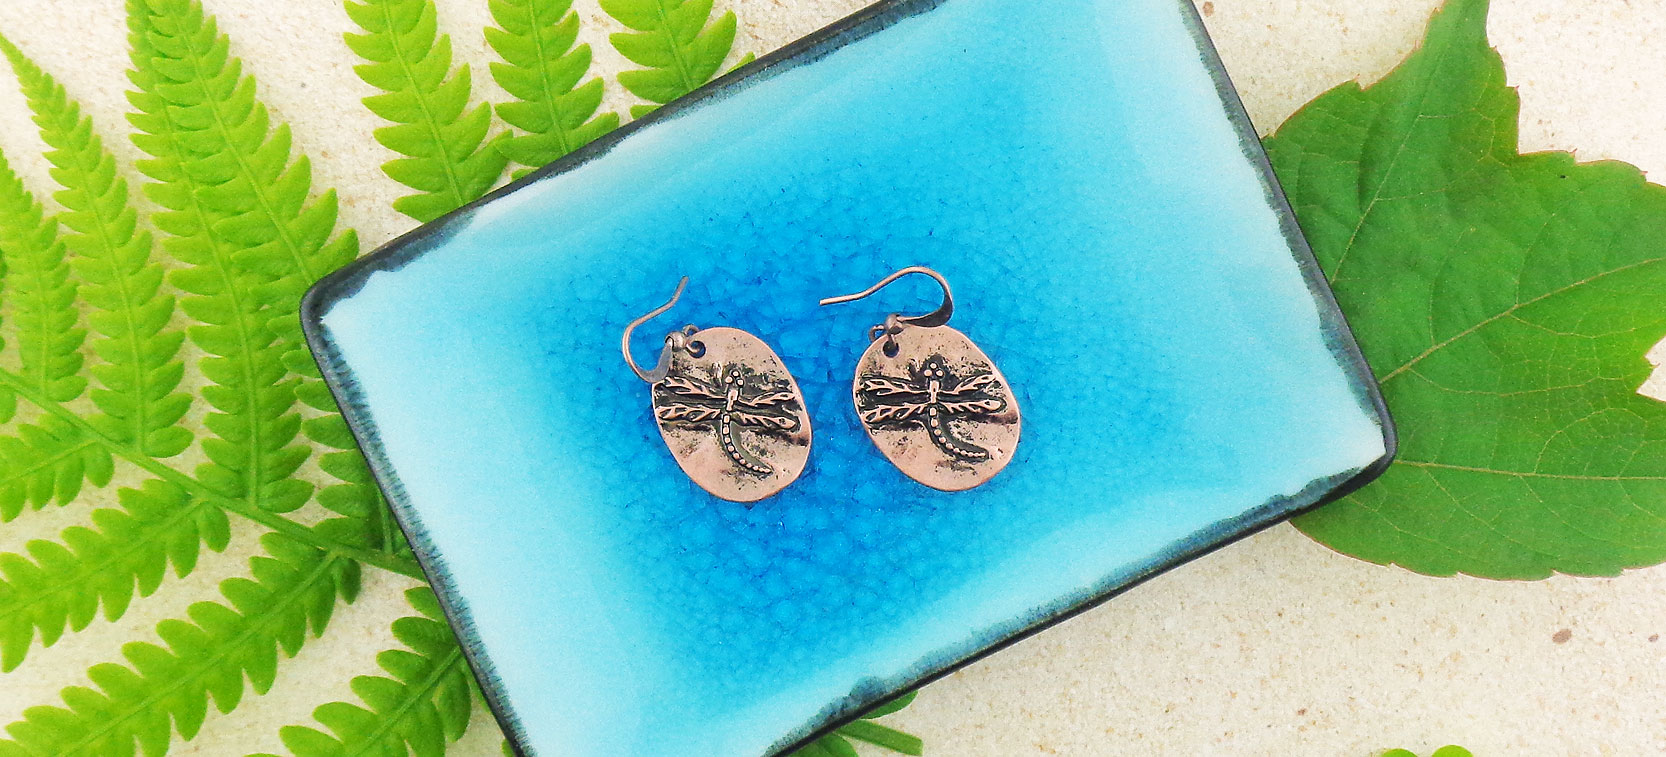 LAVISHY design and wholesale dragonfly themed vegan accessories and gfits to gift shops, boutiques and book shops, souvenir stores in Canada, USA and worldwide.